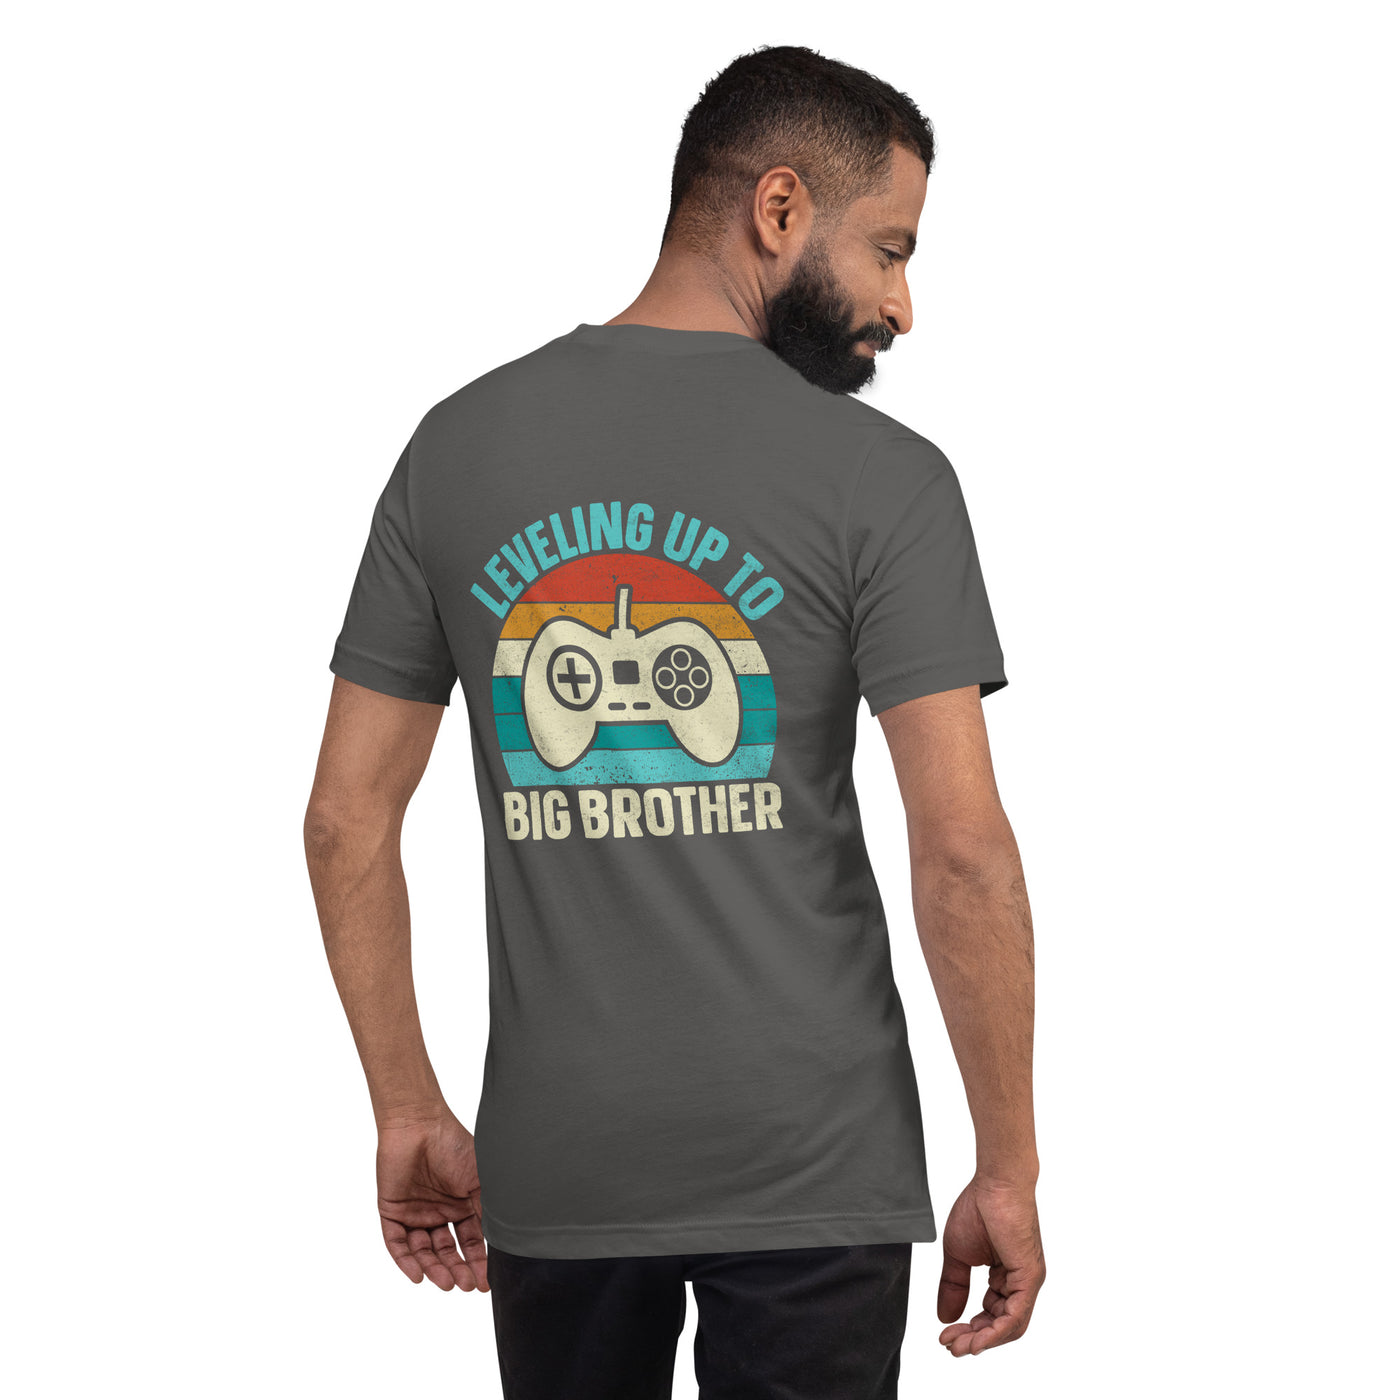 Levelling up to Big Brother V2 - Unisex t-shirt